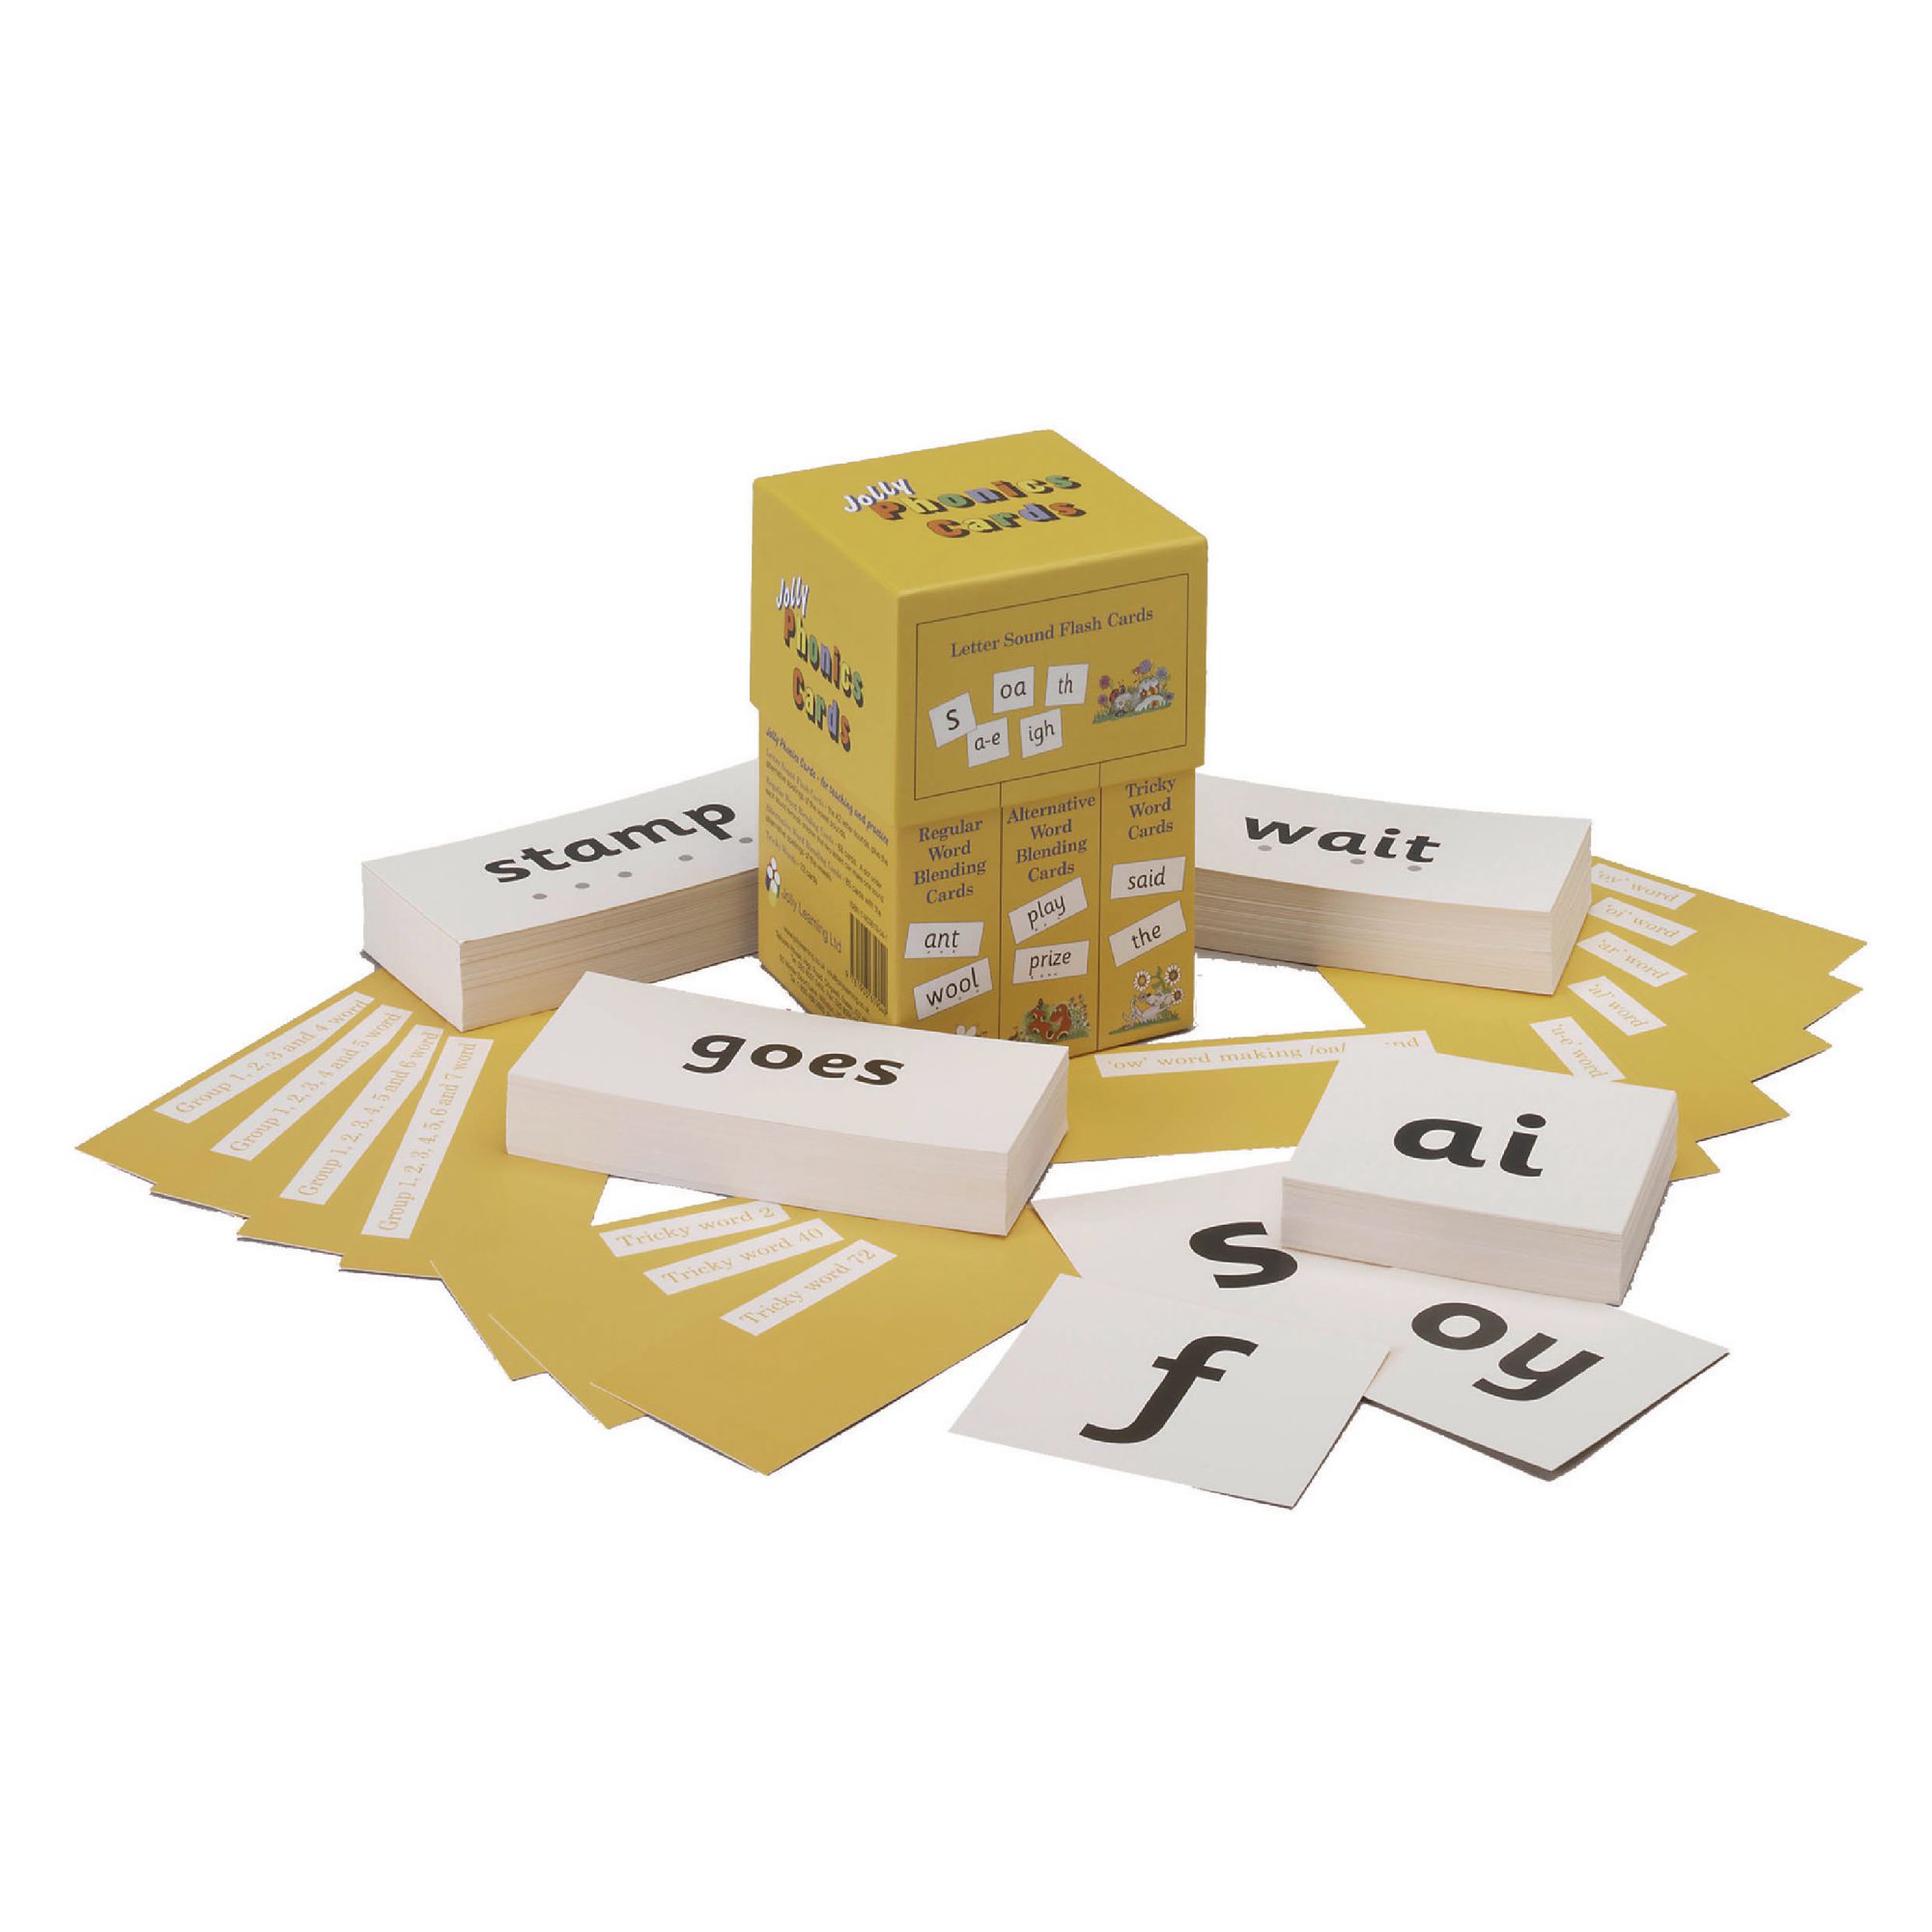 he1004479-jolly-phonics-letter-sound-flash-cards-hope-education